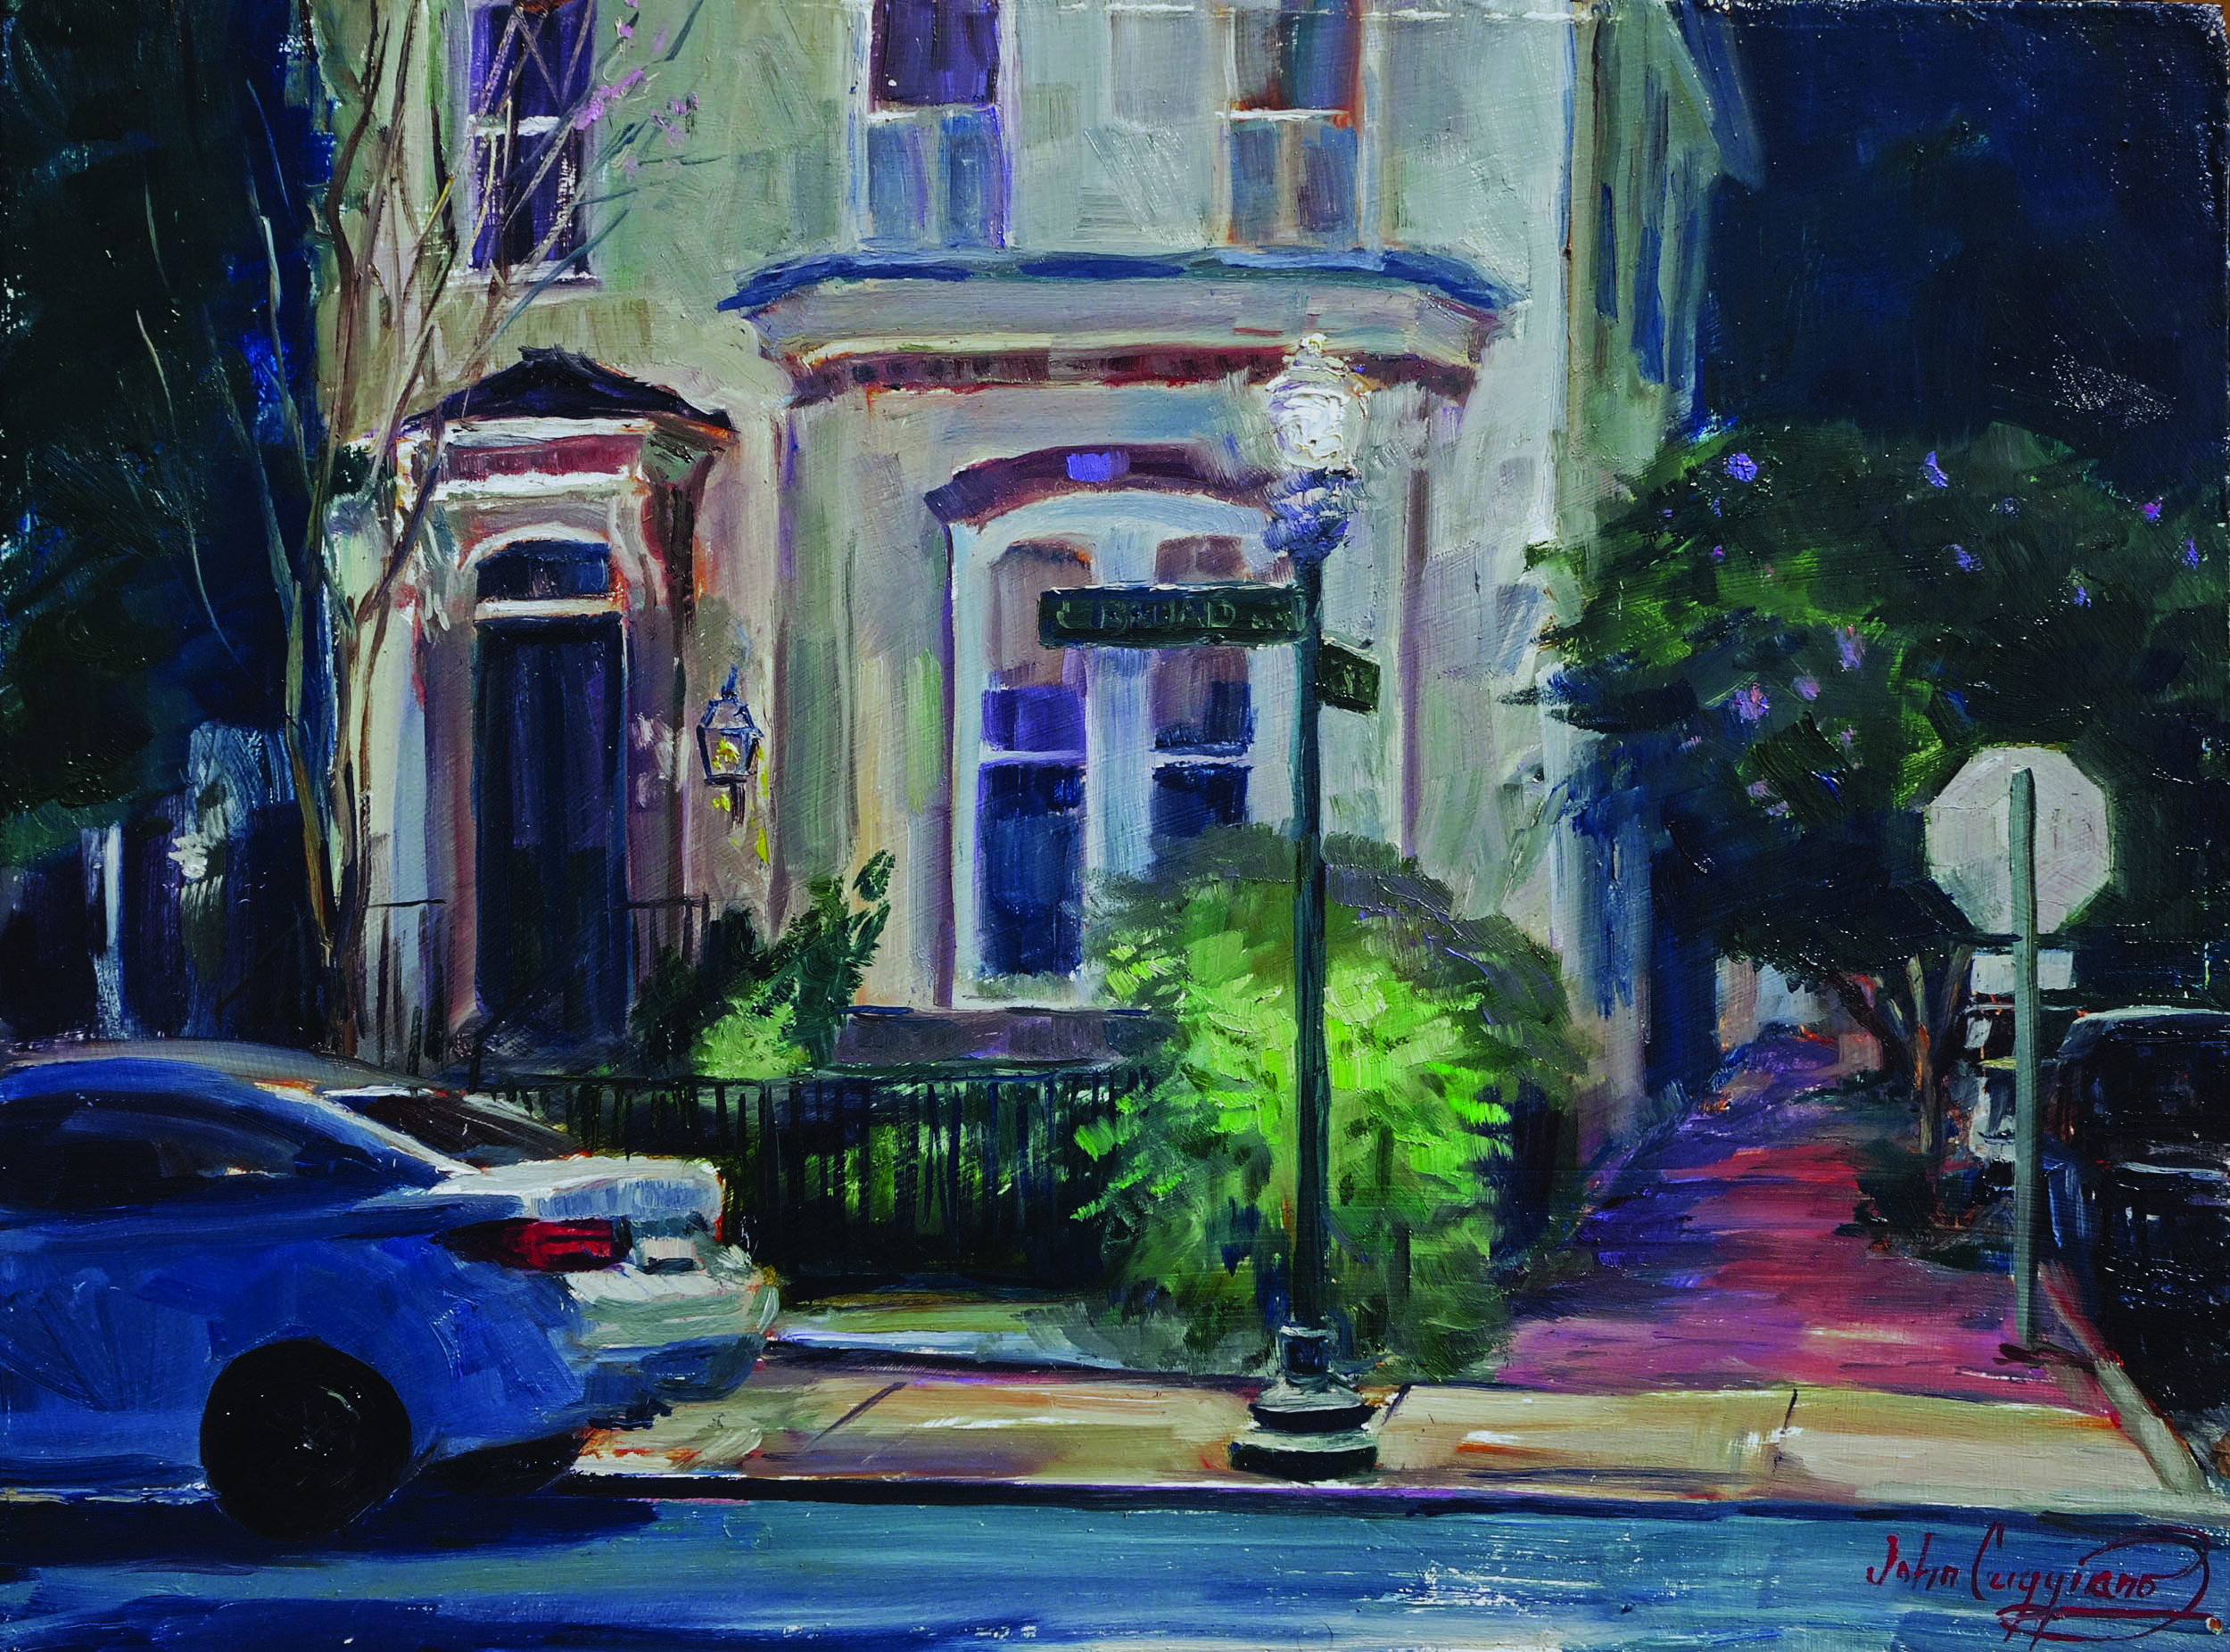 John Caggiano, "Still of the Night," 2018, oil, 12 x 16 in., Available from artist, Plein air